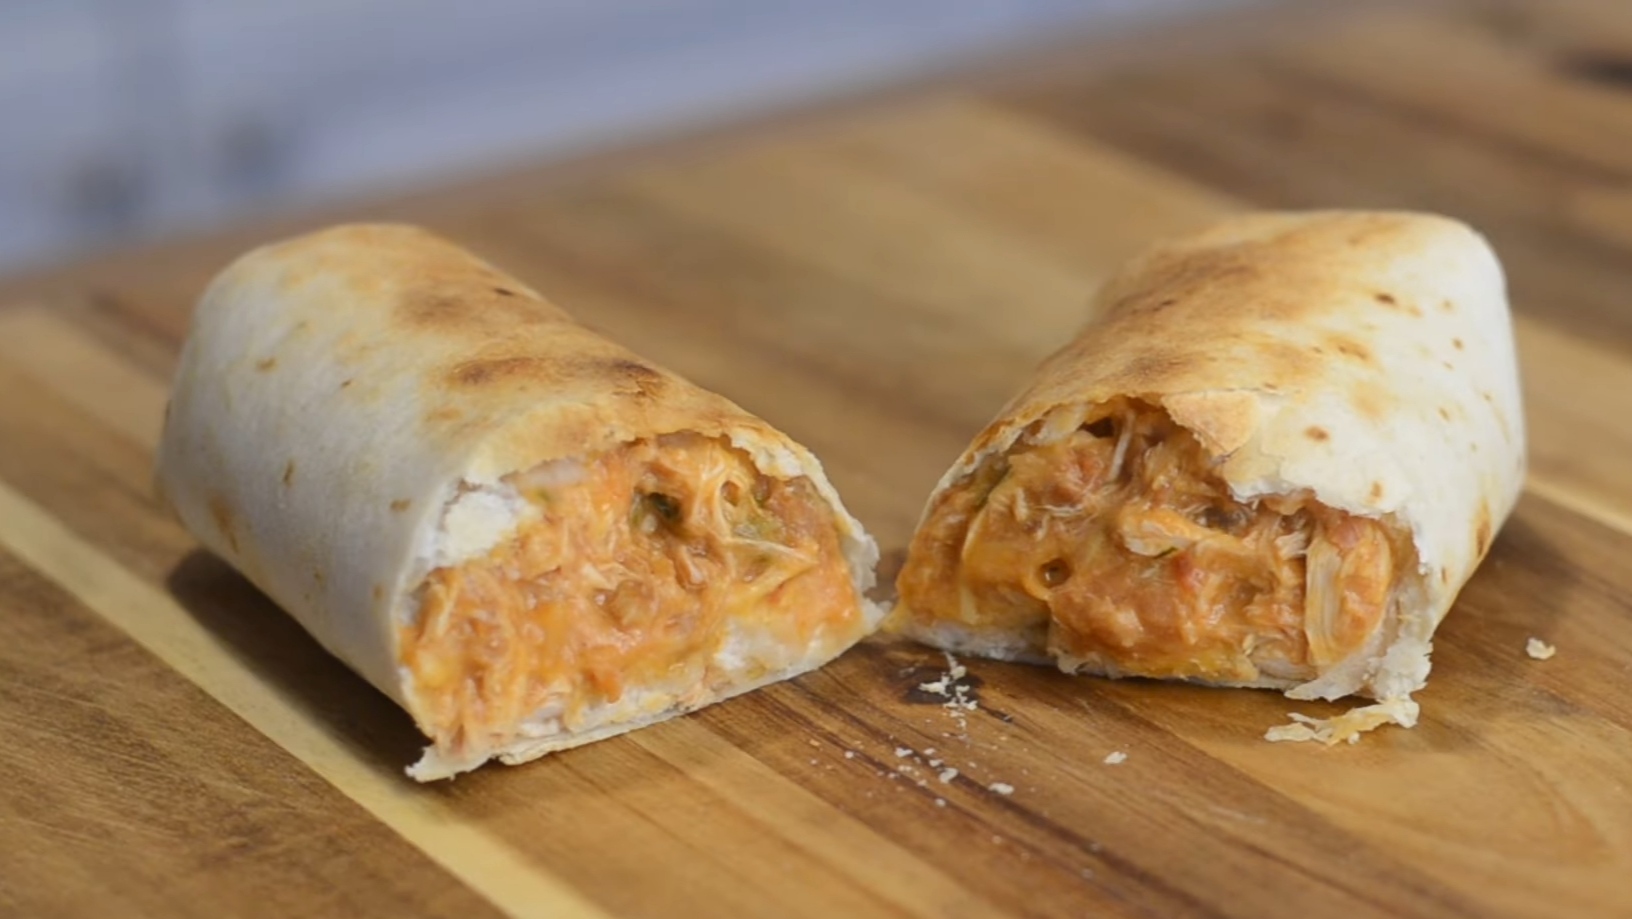 Chimichangas, quick and easy recipe to make at home 